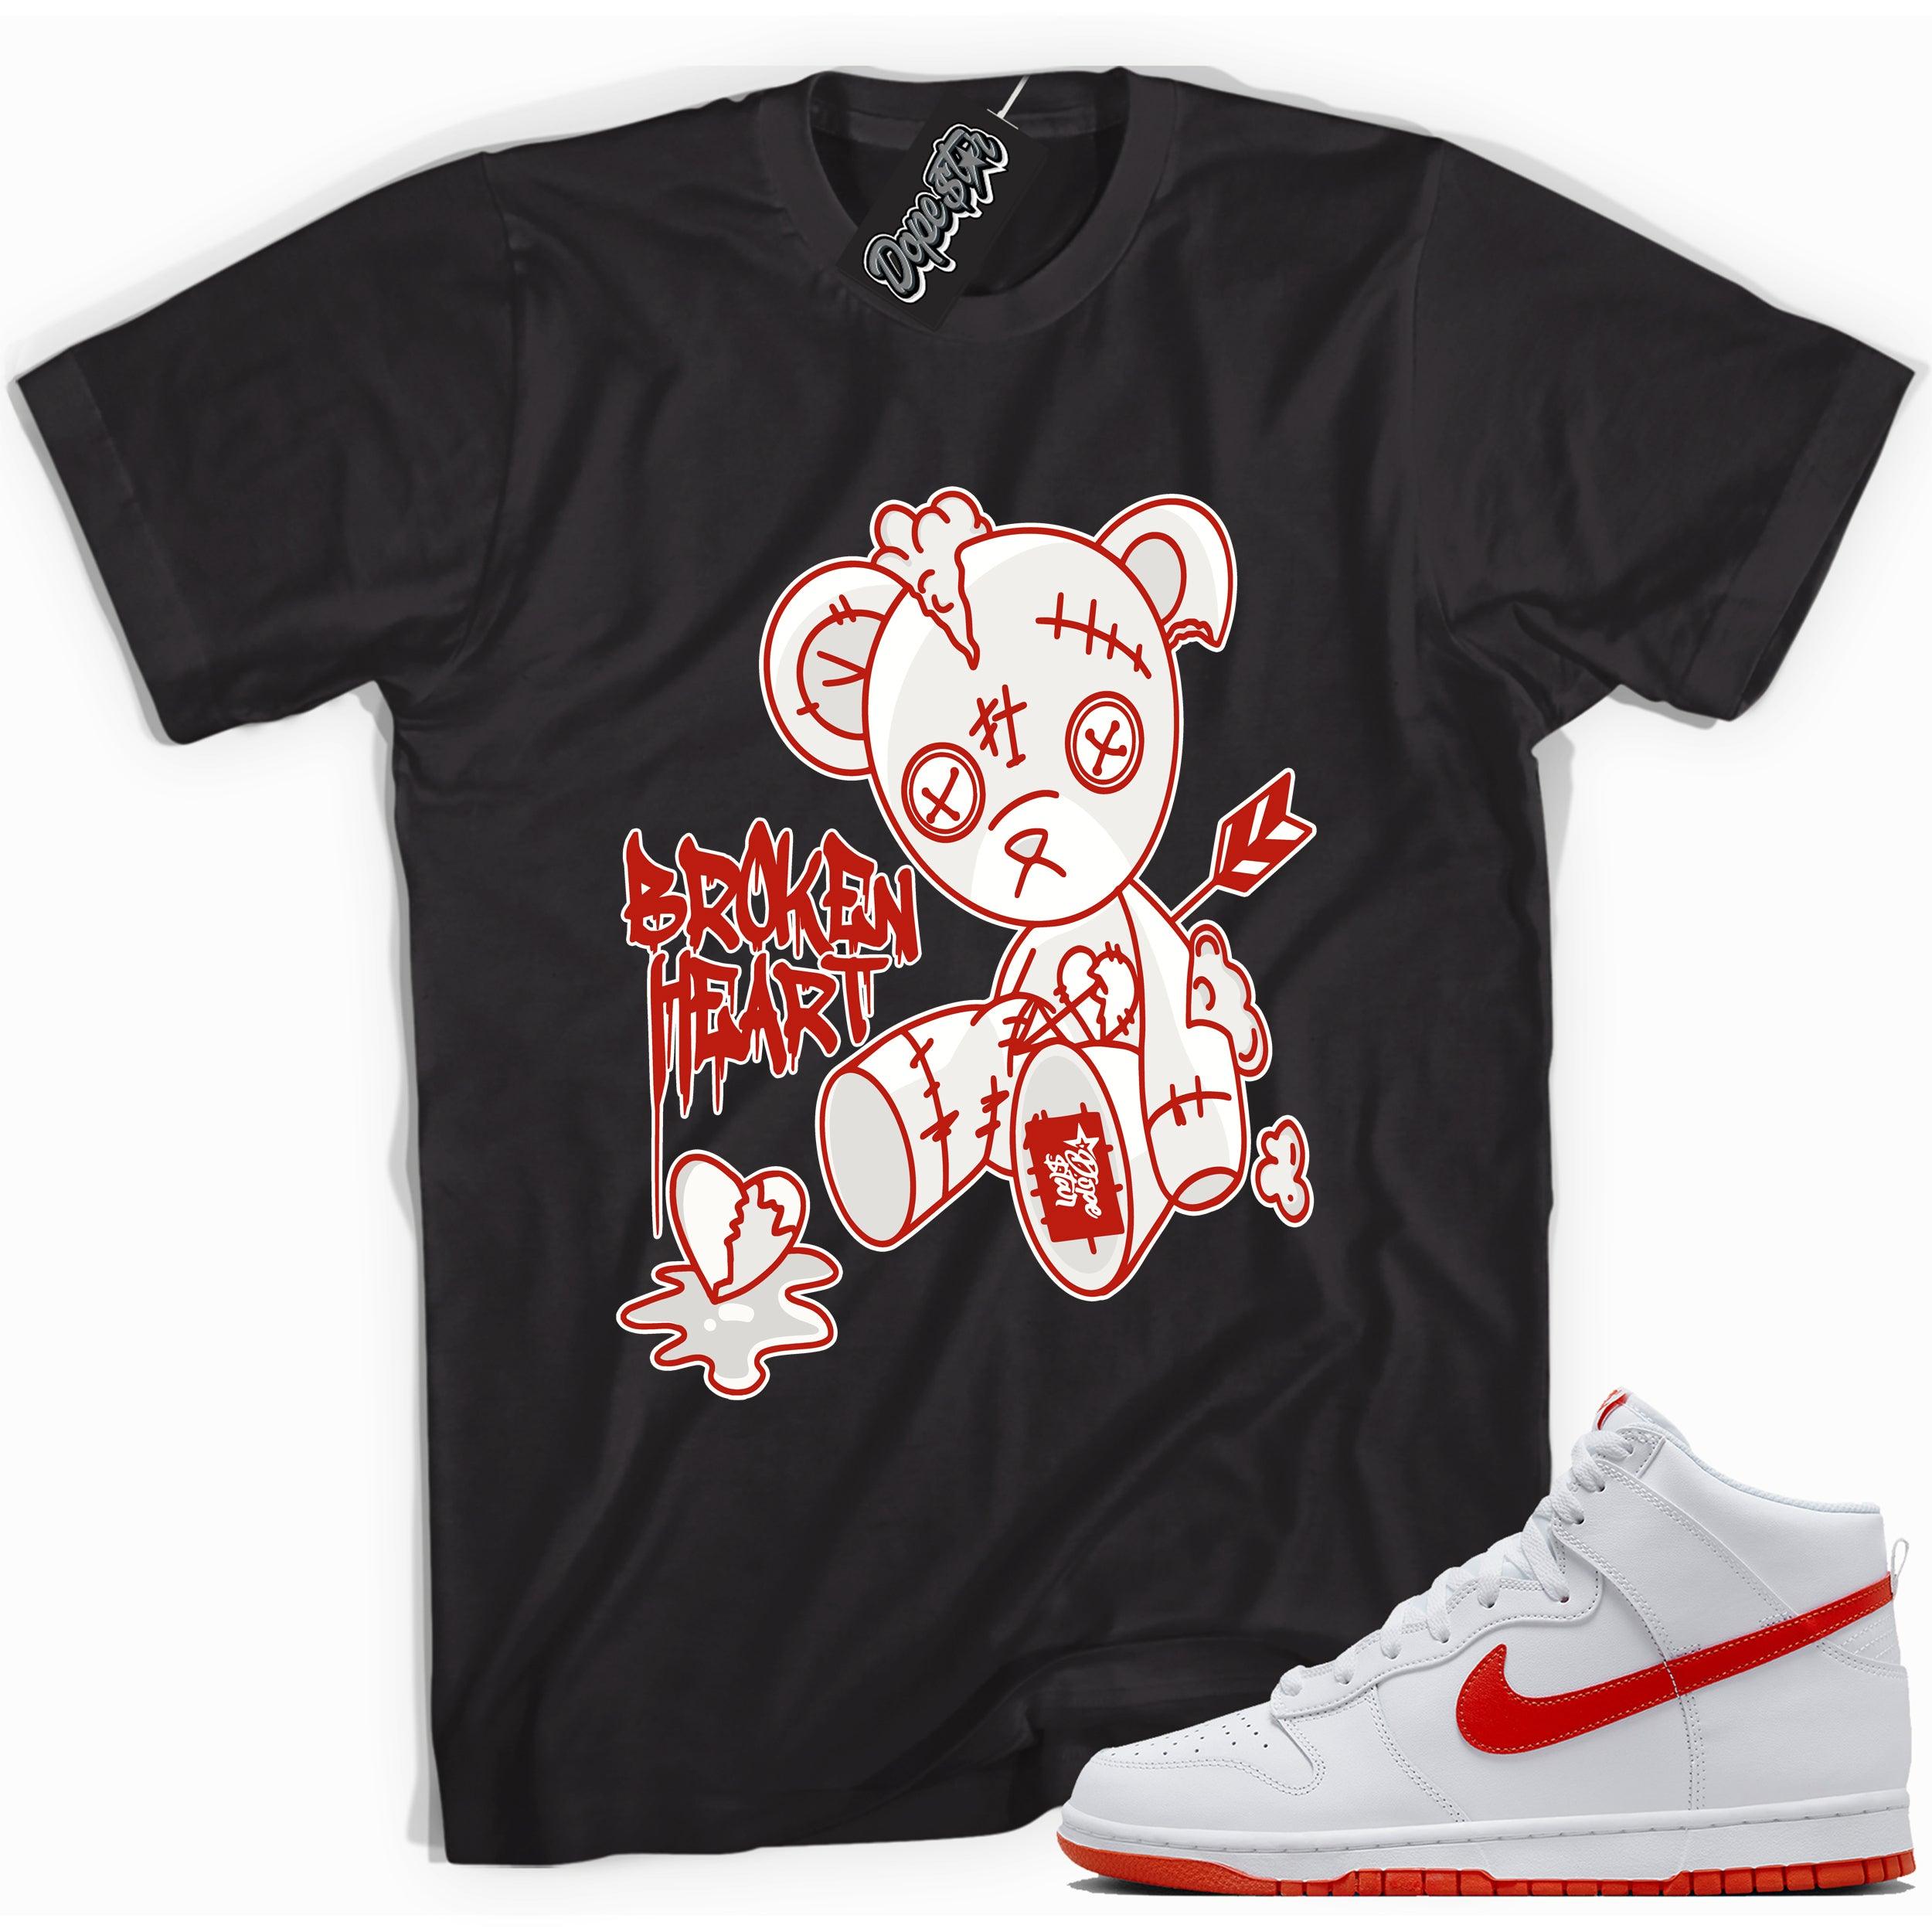 Cool black graphic tee with 'broken heart bear' print, that perfectly matches Nike Dunk High White Picante Red sneakers.